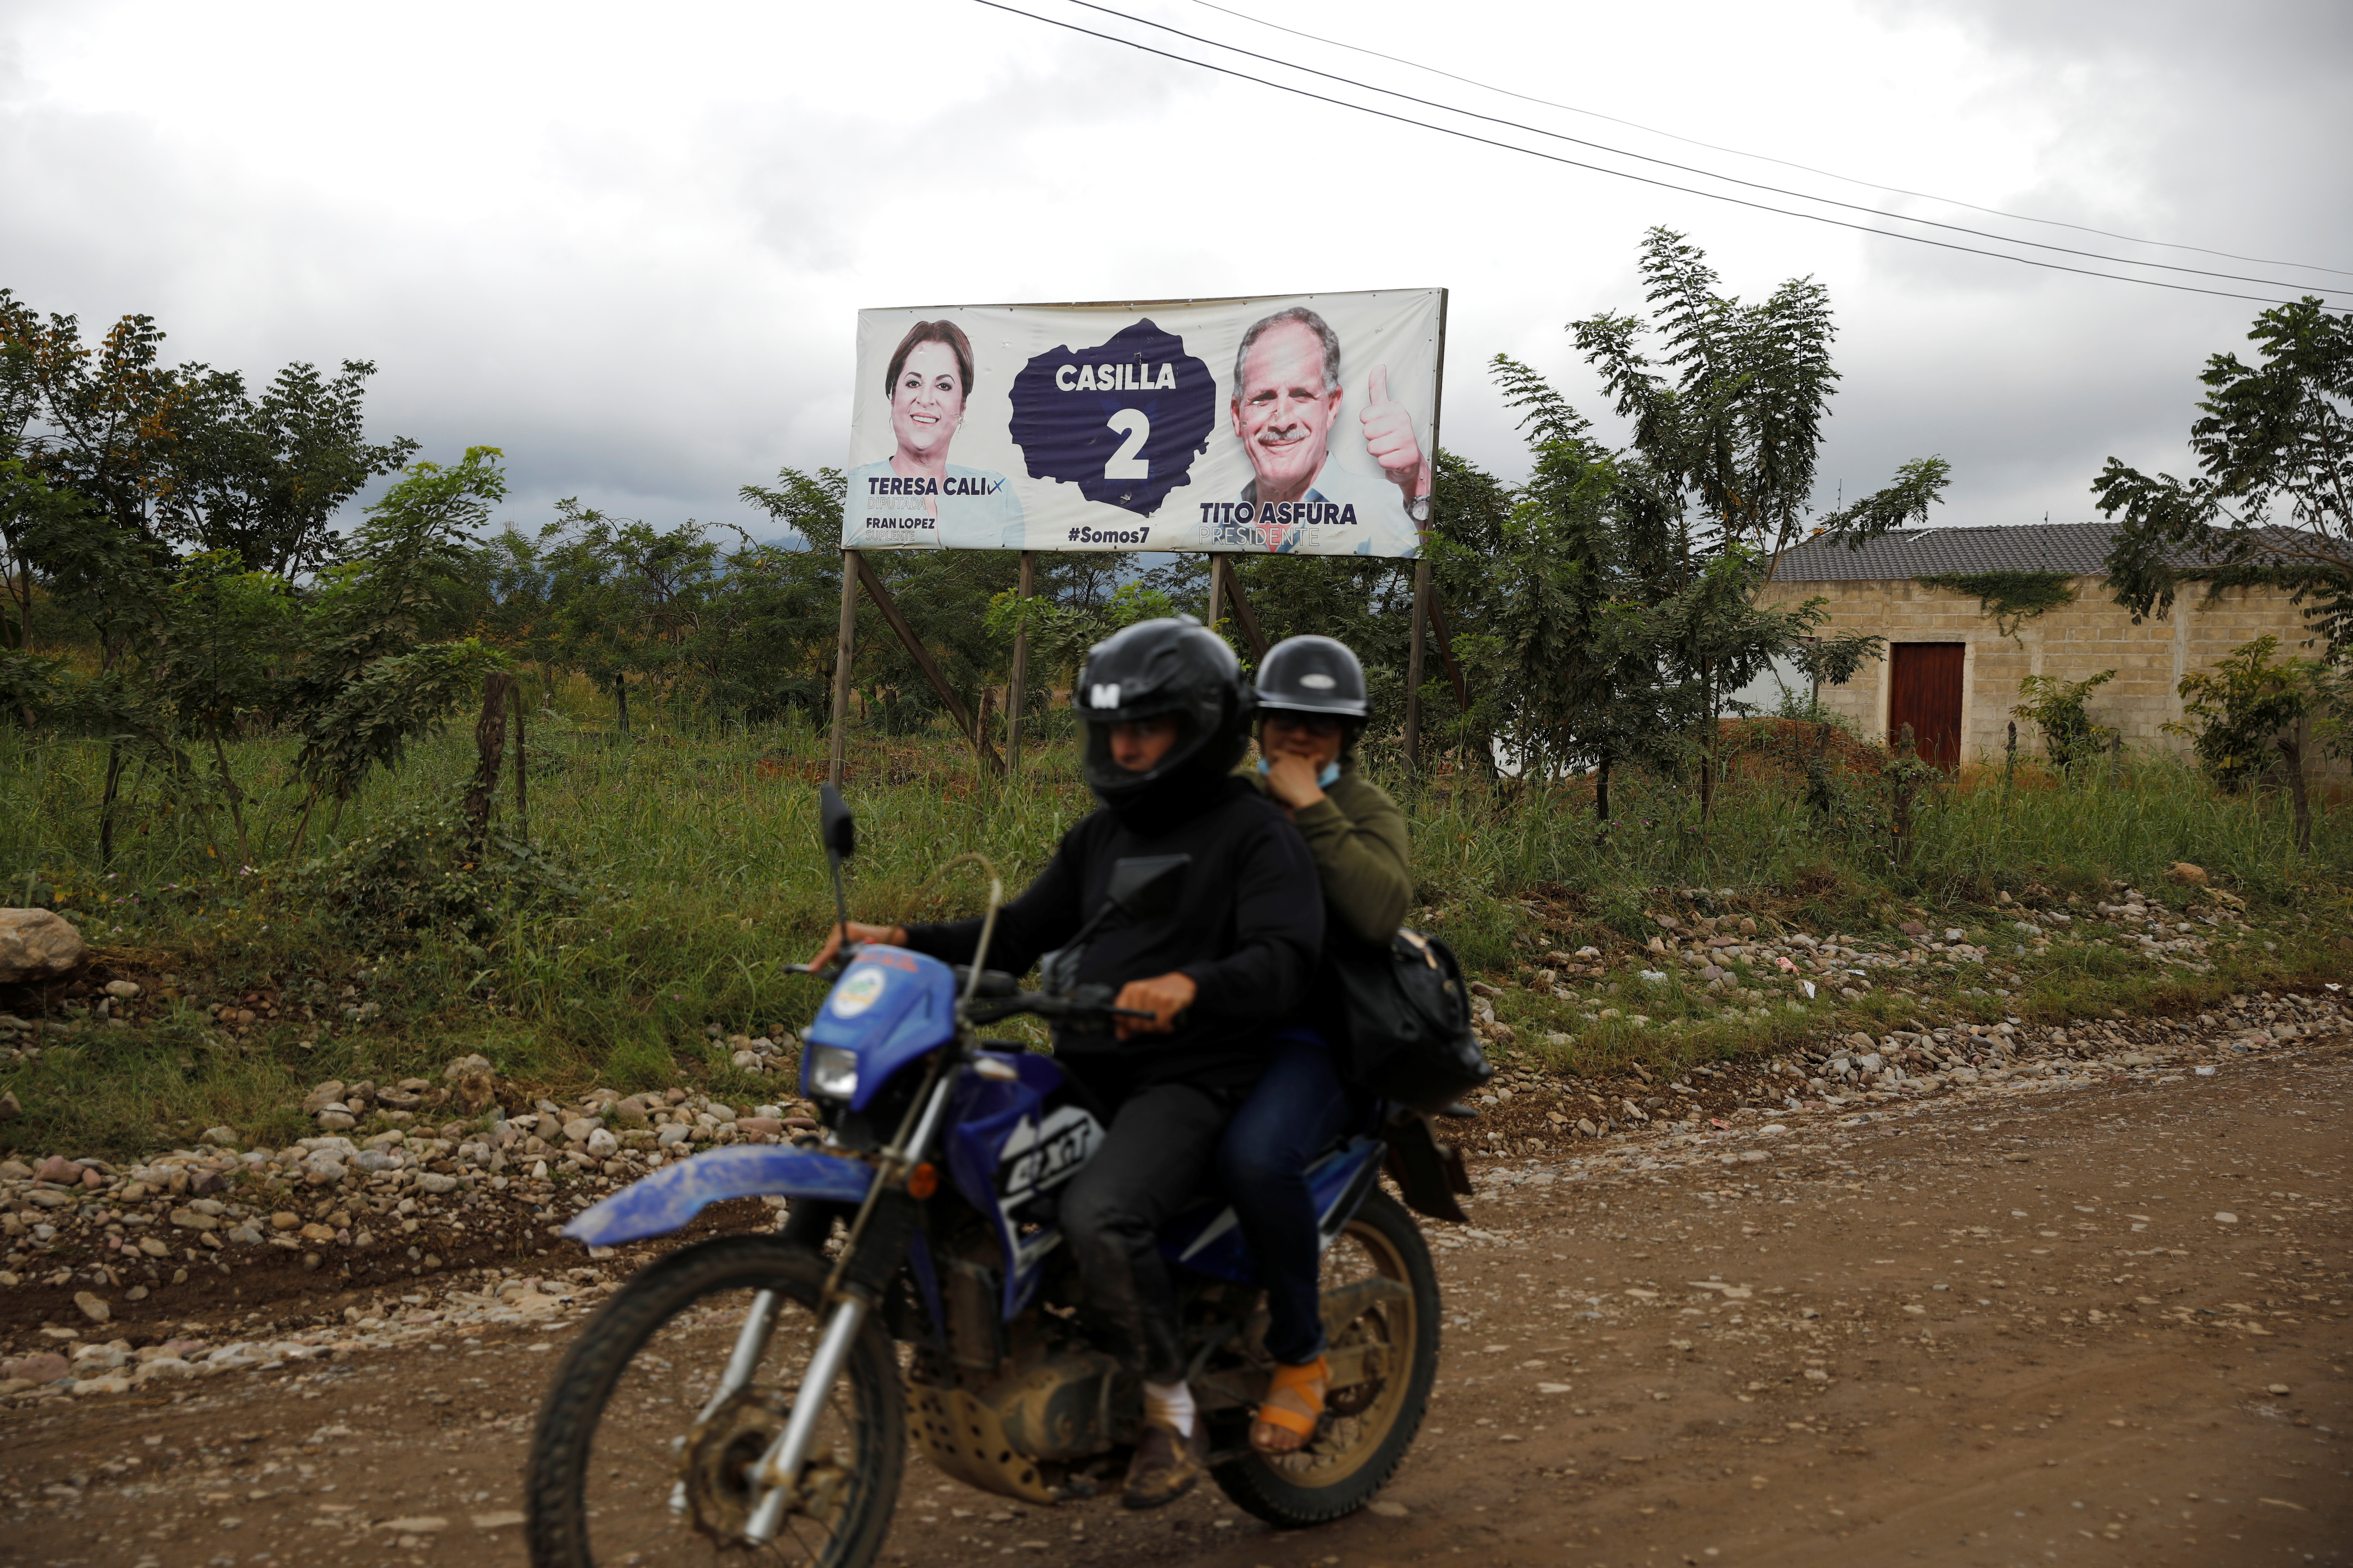 A campaign poster of Nasry Asfura, presidential candidate of the National Party of Honduras, is seen on the side of a road in Catacamas, Honduras November 27, 2021. REUTERS/Jose Cabezas